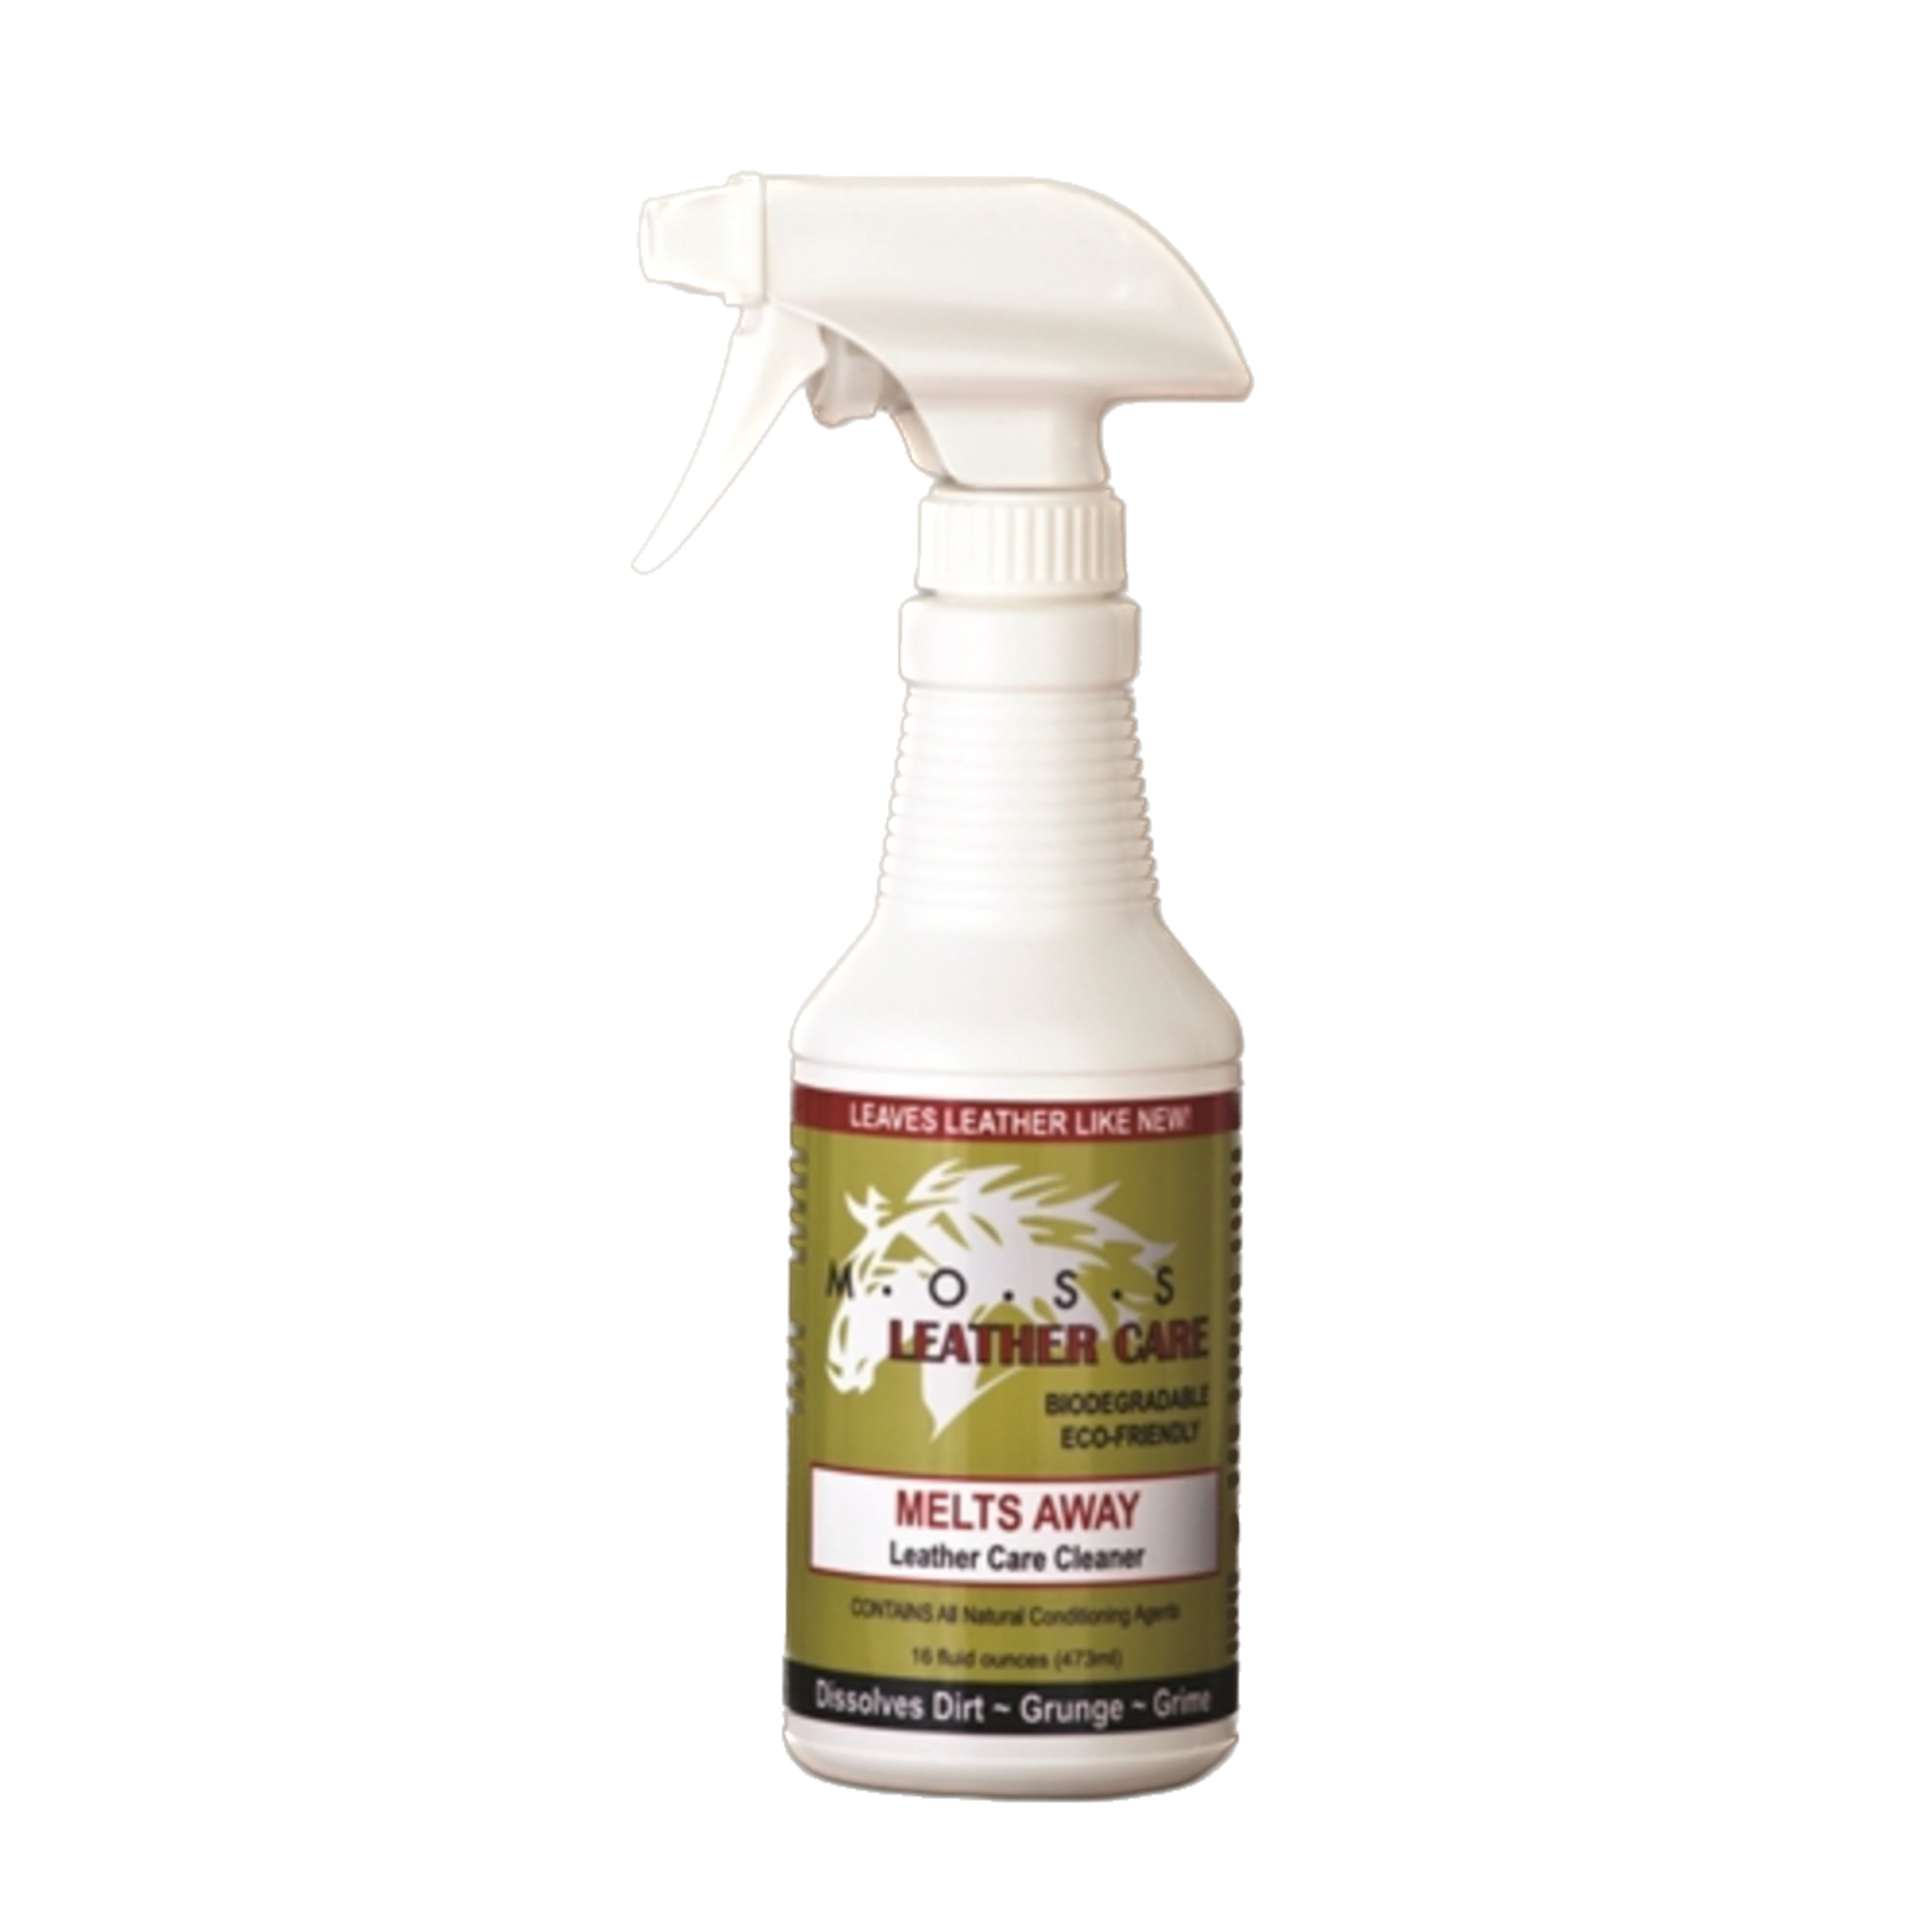 MOSS Melts Away Leather Care 16 oz